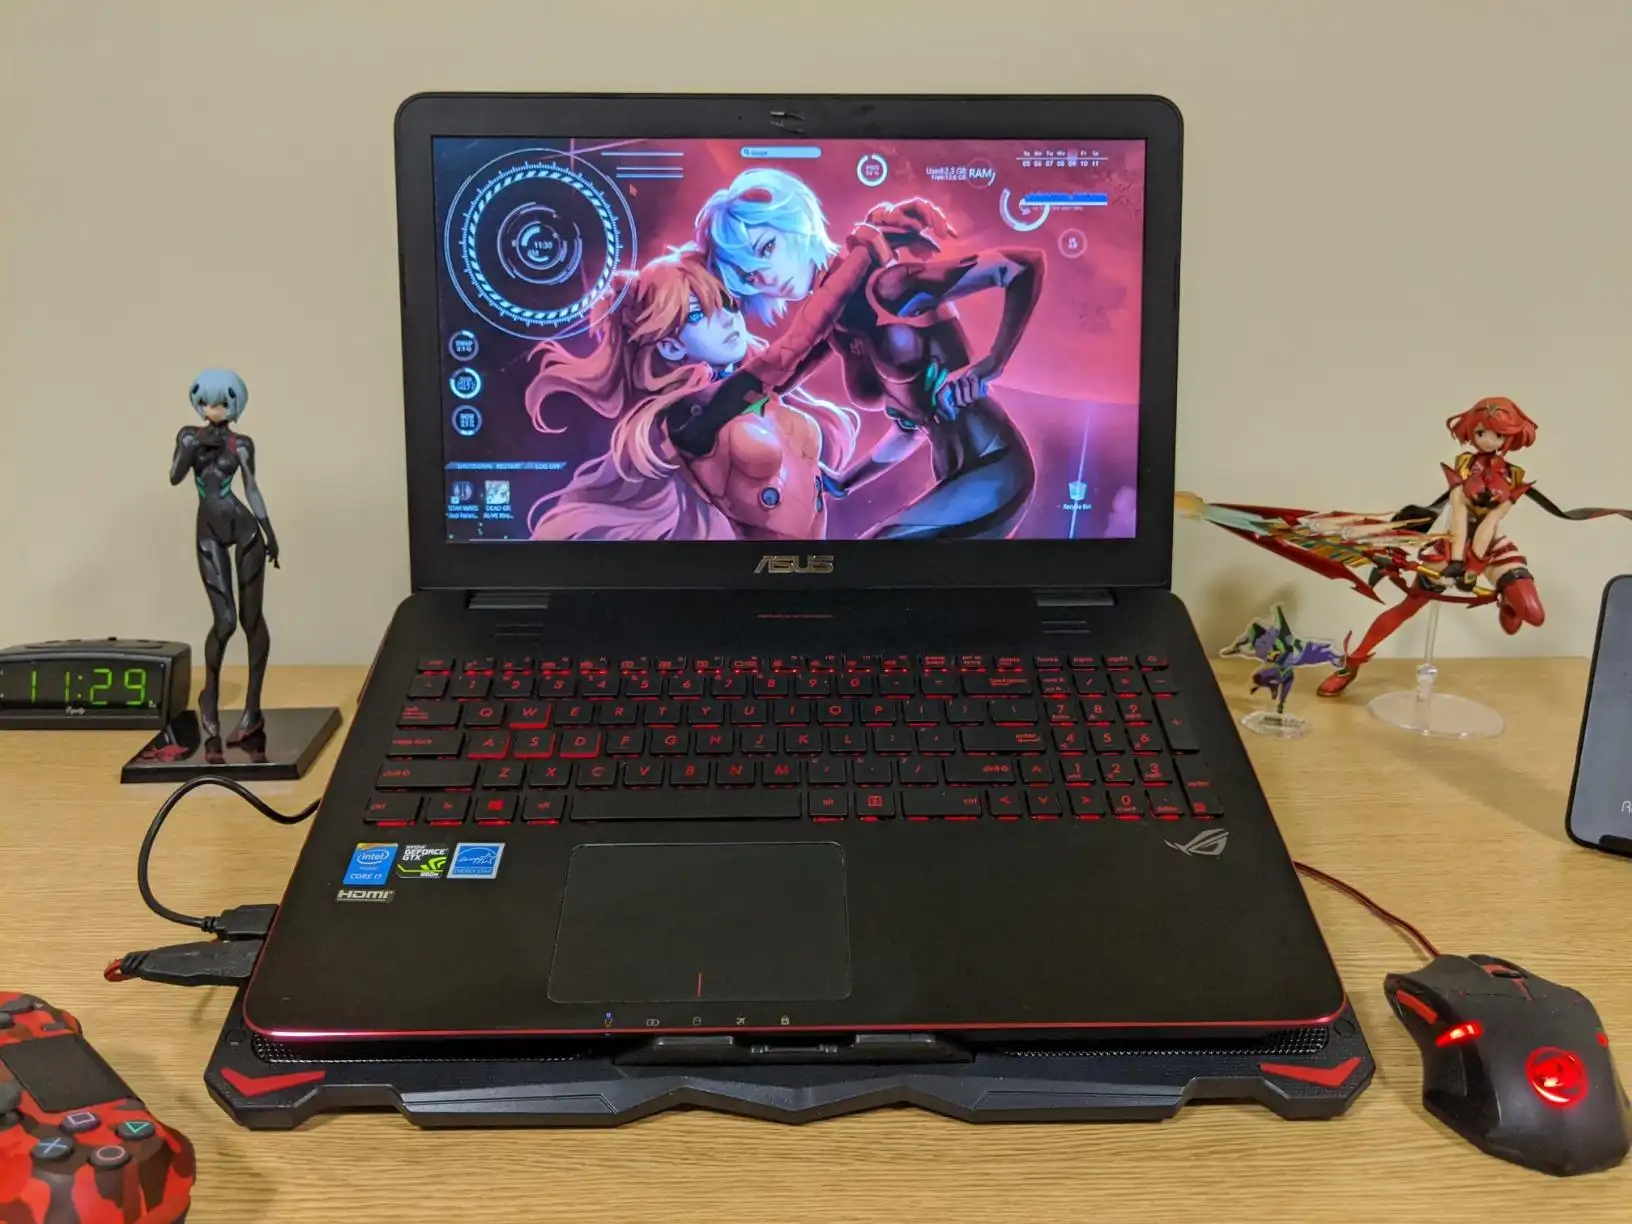 Is the AICHESON Laptop Cooling Pad any good?